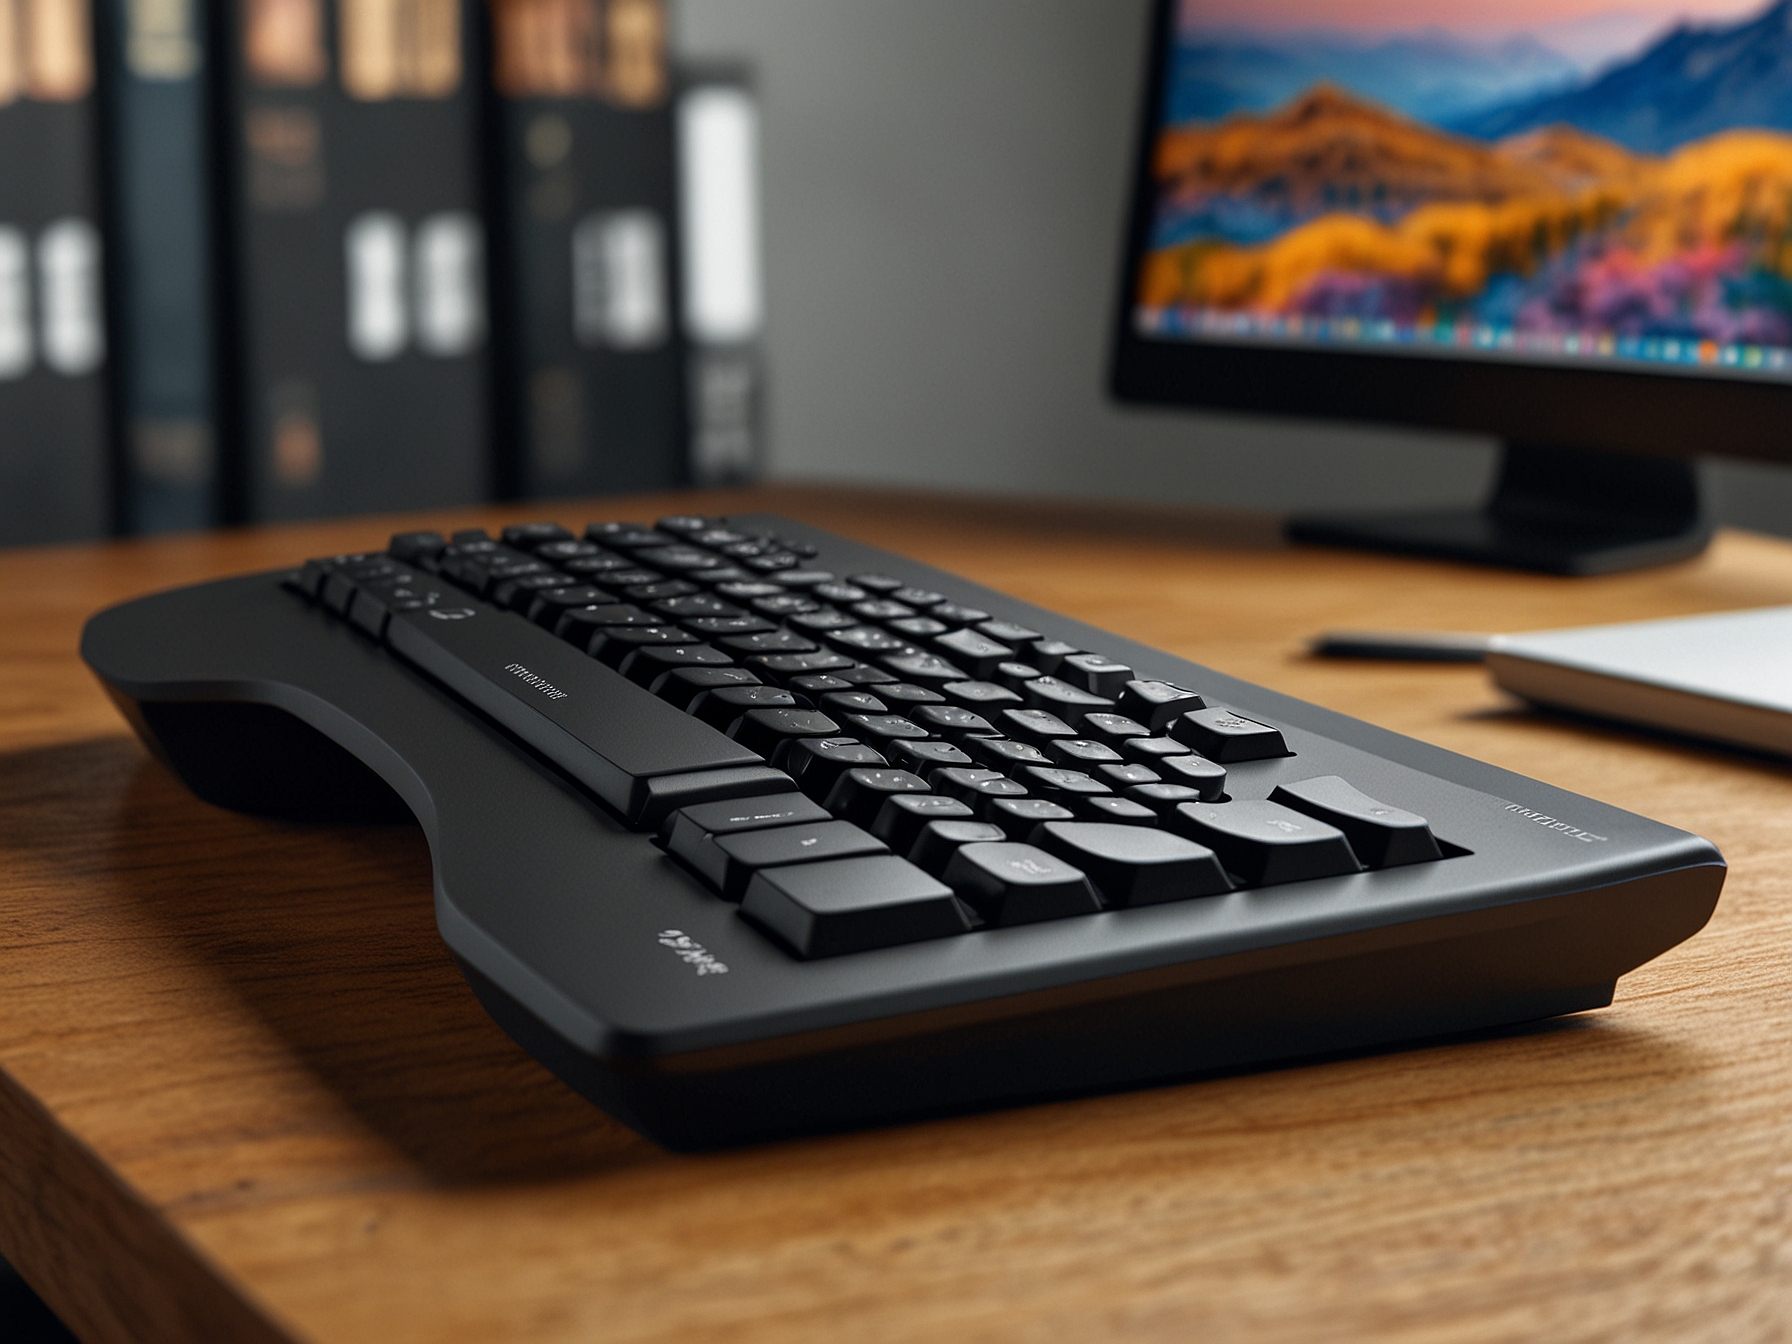 The Wombat Willow Pro Keyboard, showcasing its sleek, low-profile design and ergonomic layout, perfect for both macOS and Windows users, set against a modern desk workspace.